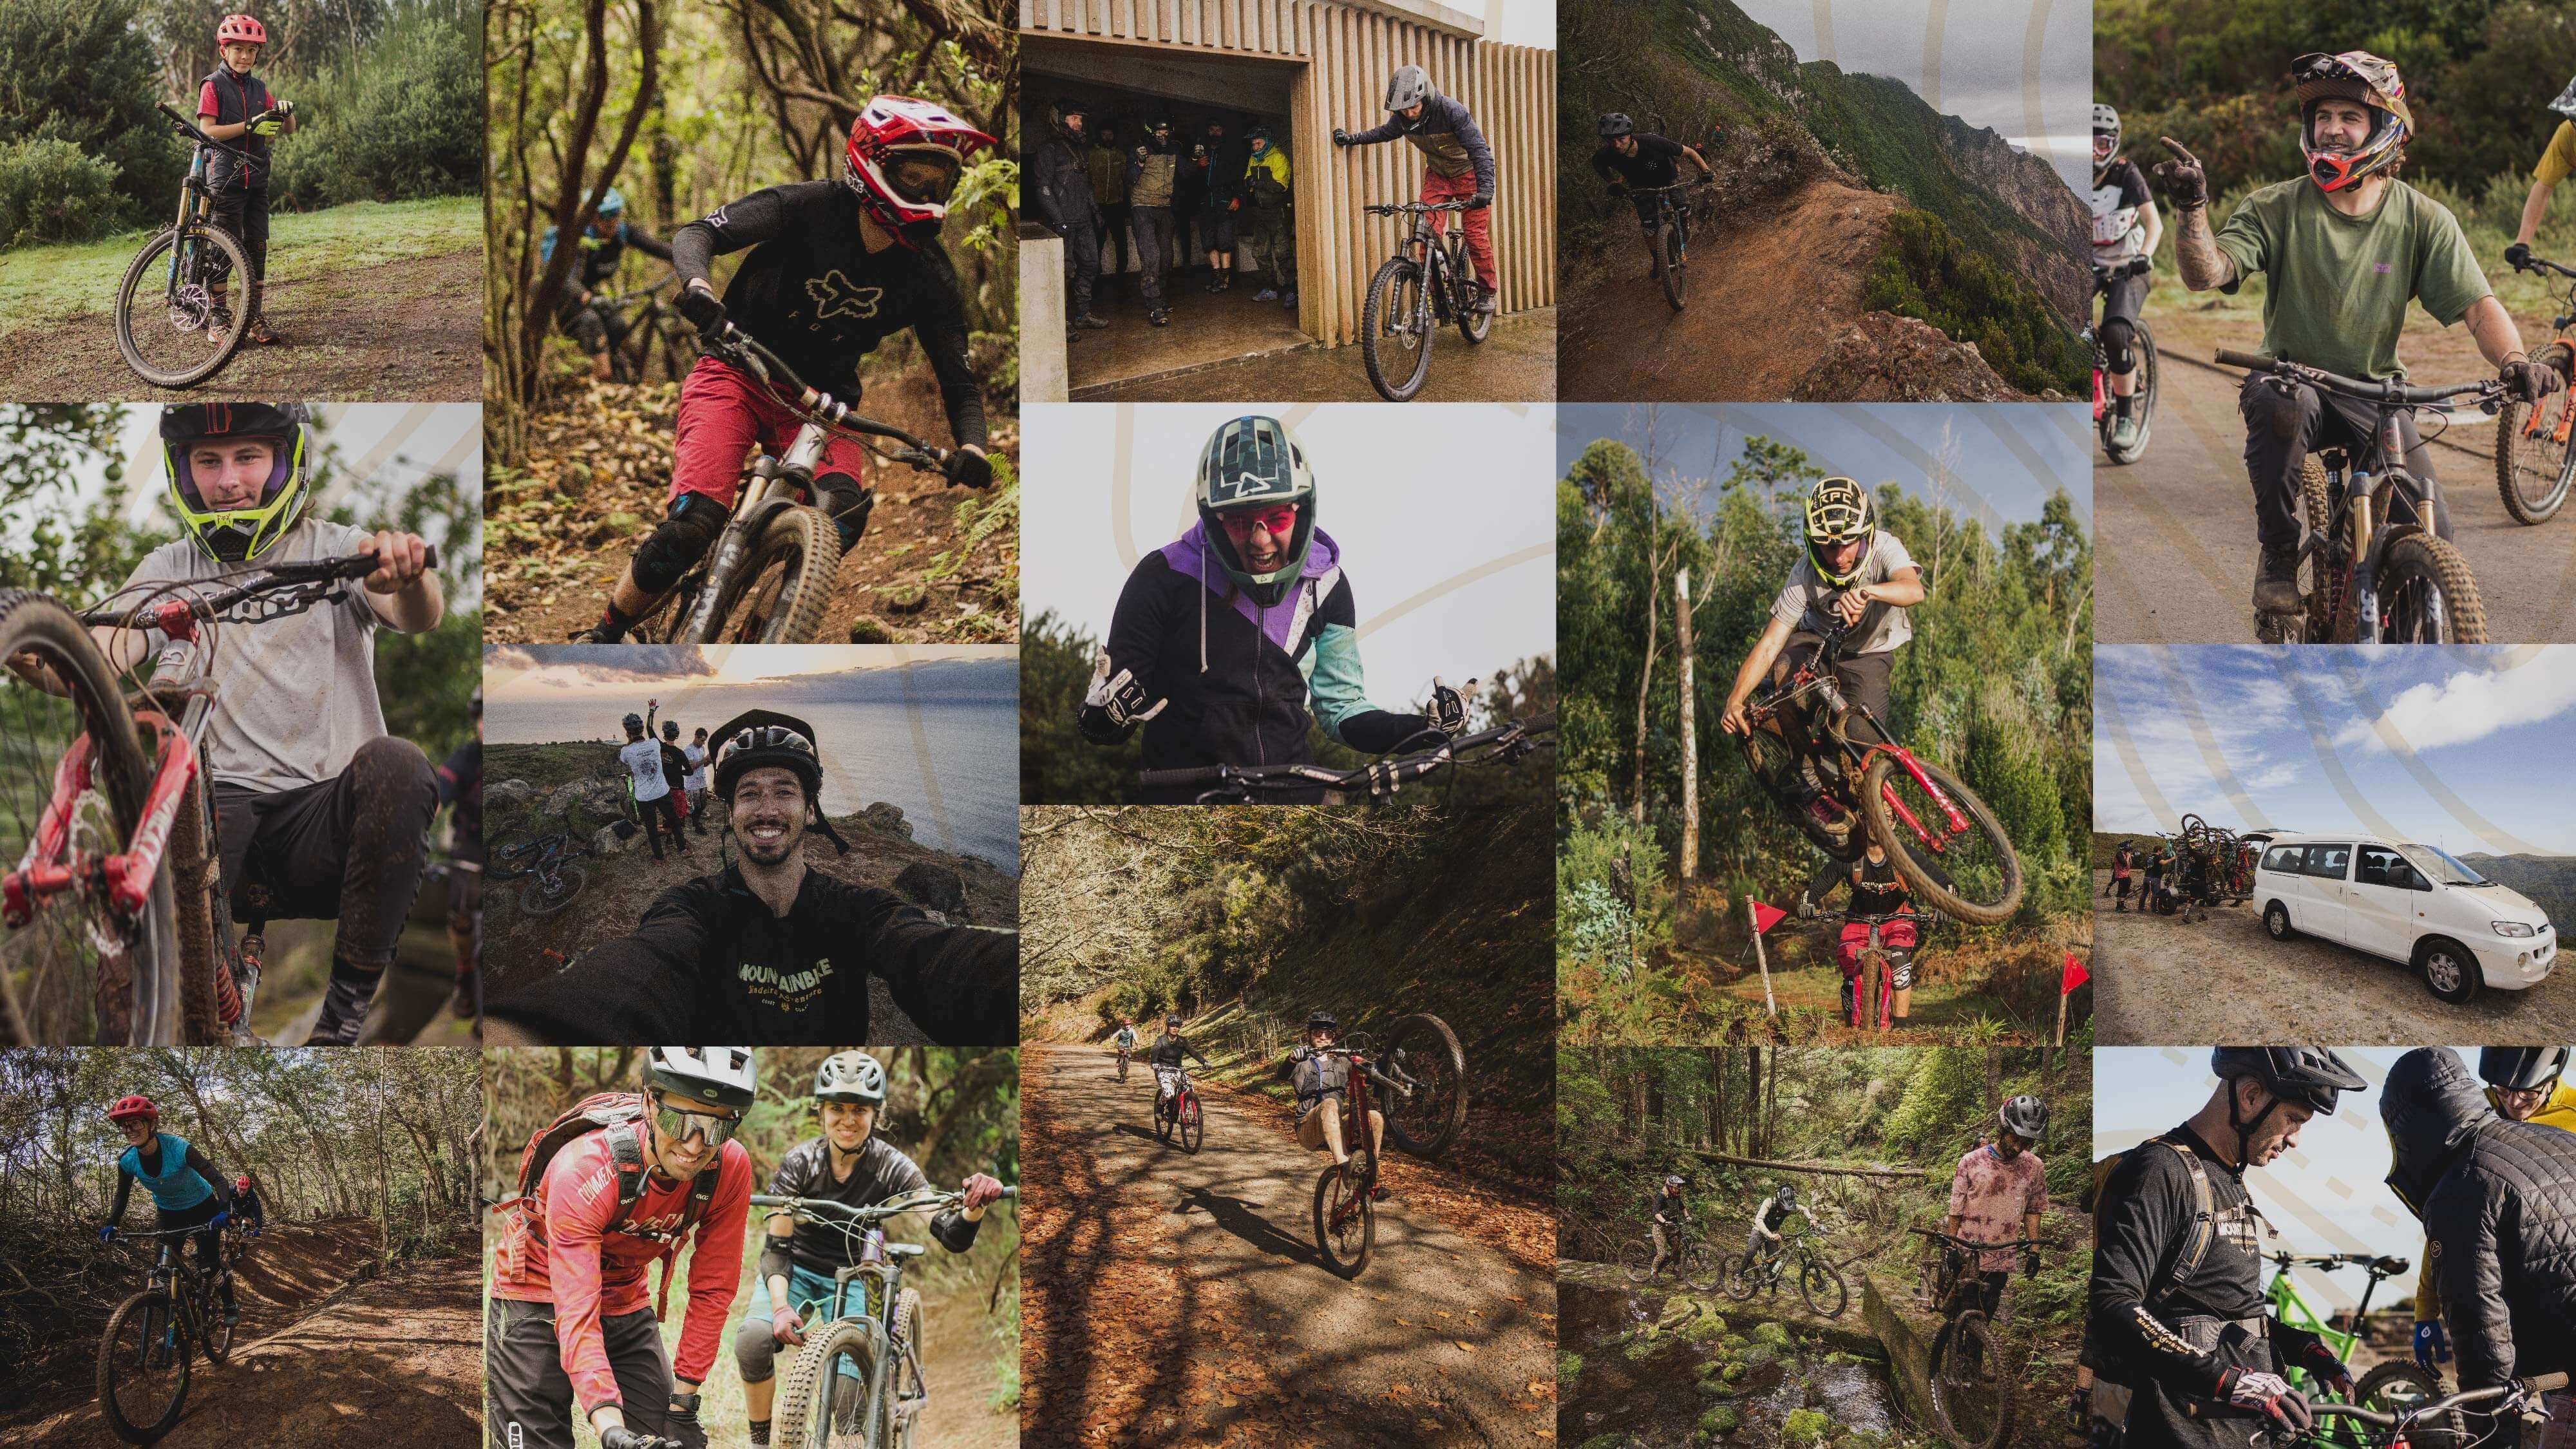 Riding through the rugged terrain of Madeira Island, feeling alive with every twist and turn on my mountain bike